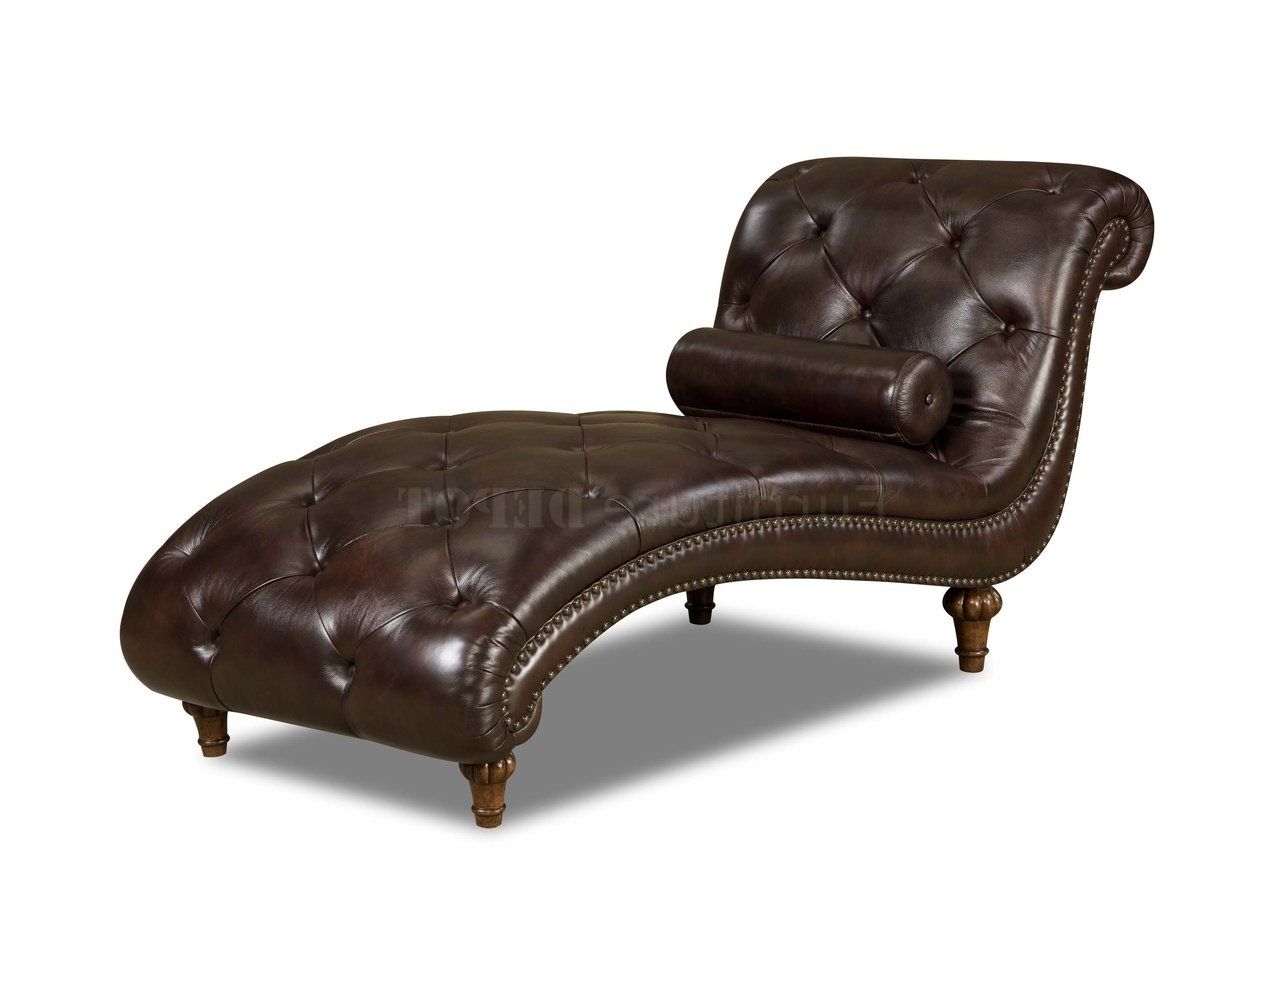 Fashionable Brown Leather Chaise Lounges Within Brown Leather Chaise Lounge Chair • Lounge Chairs Ideas (View 2 of 15)